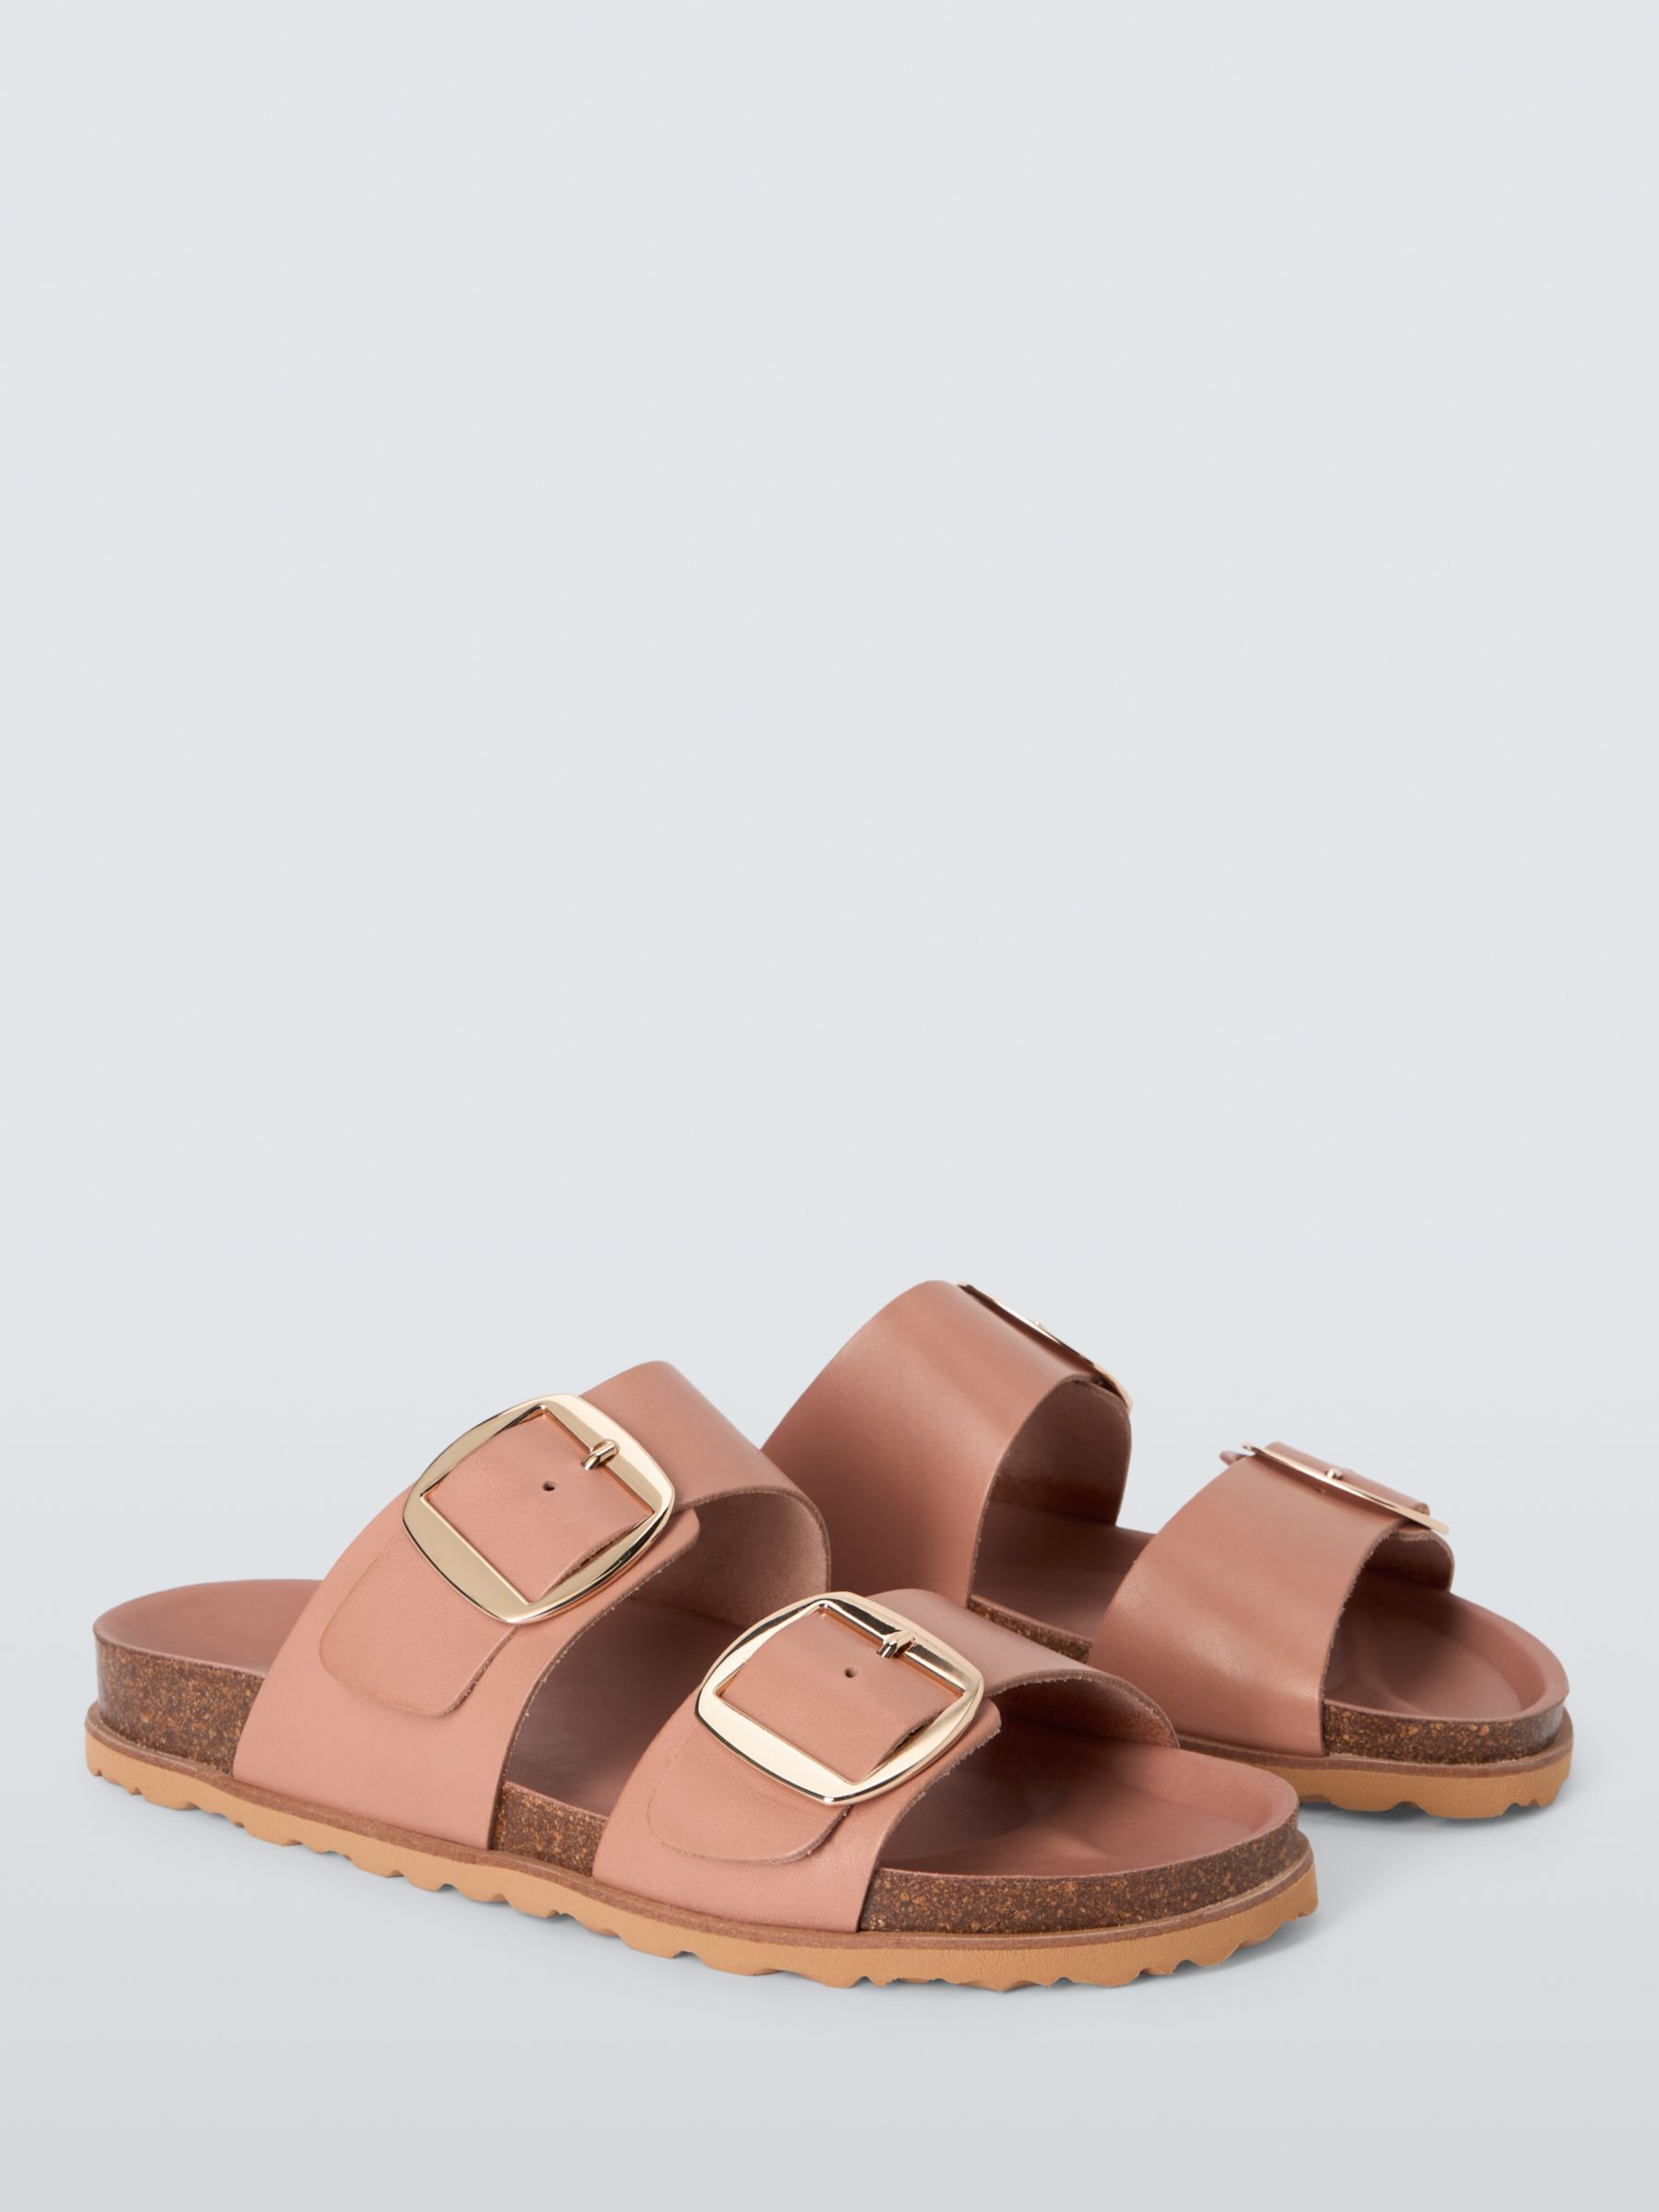 Buy John Lewis Lagos Leather Double Buckle Footbed Sandals, Blush Online at johnlewis.com